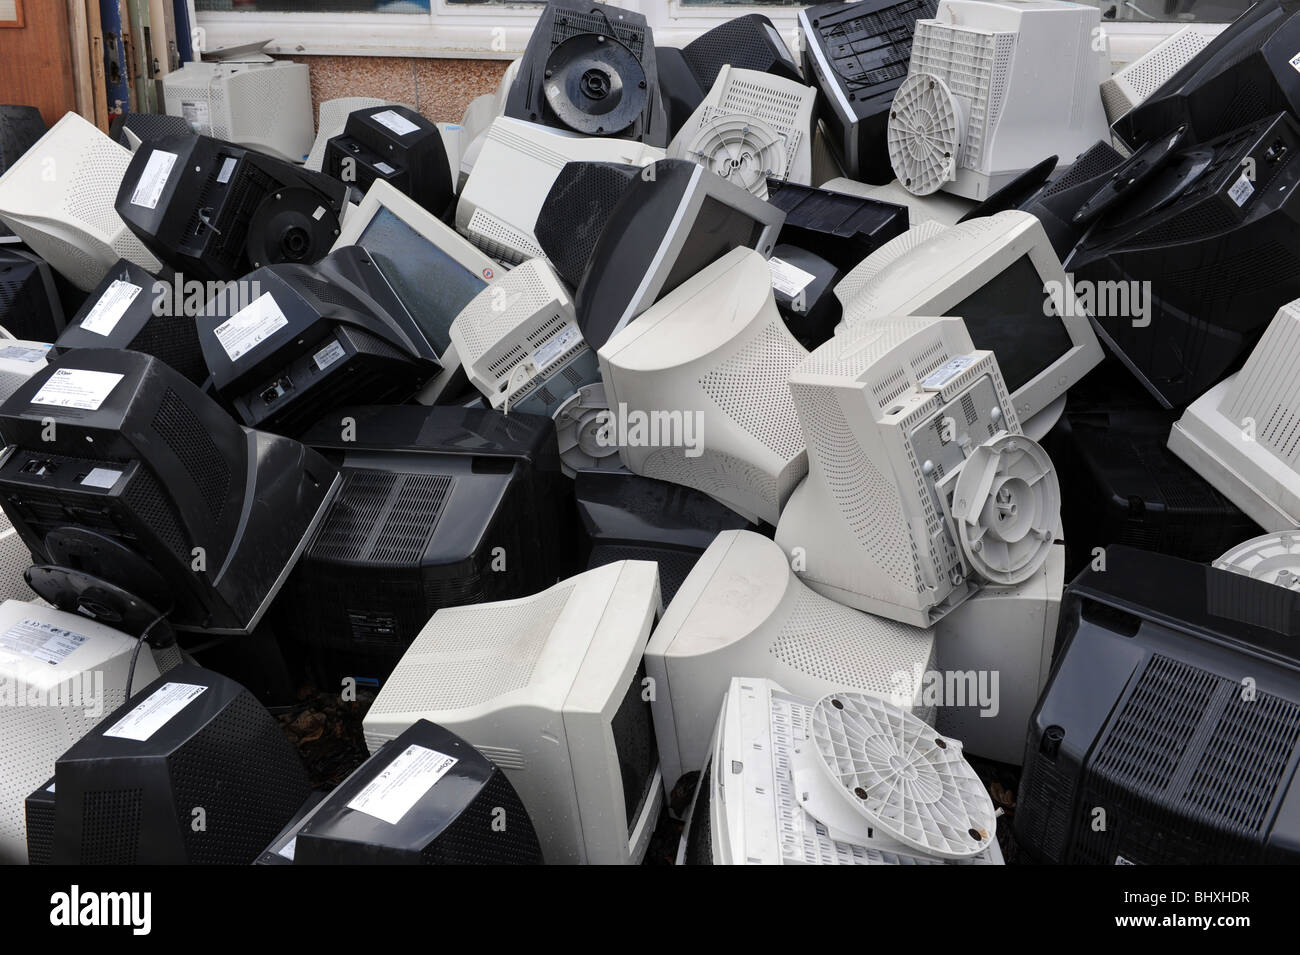 Scrap heap of unwanted computers outside a school Uk Stock Photo